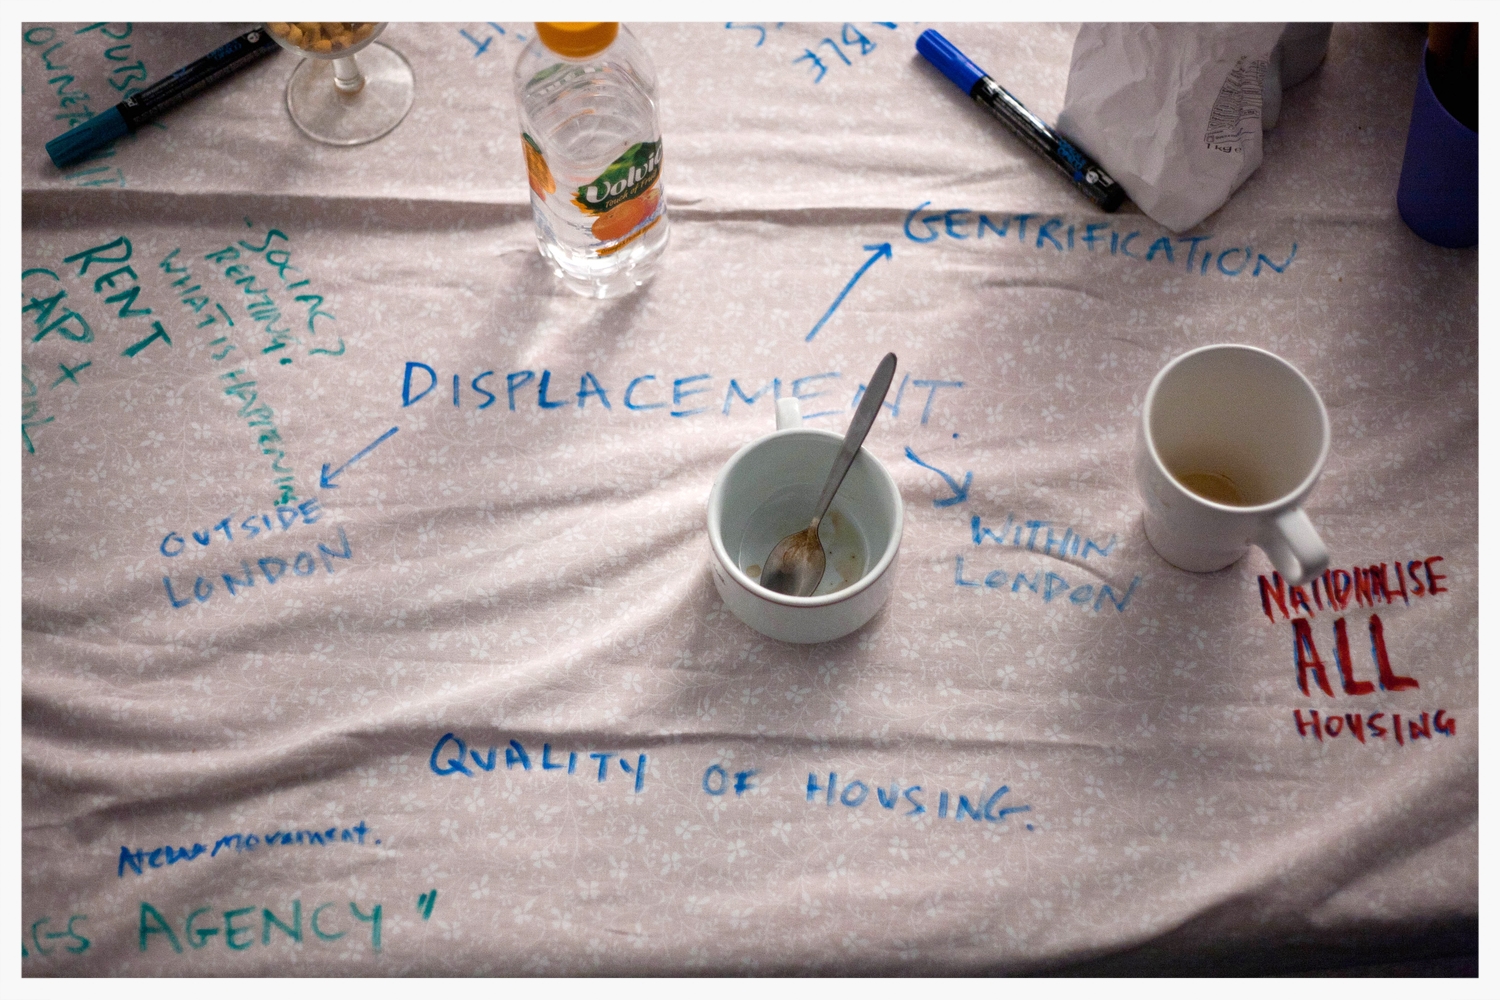  Round table discussion   'Real Estates'  a project by Fugitive Images, Focus E15,http://focuse15.org/ PEER Gallery, 19th March 2015 